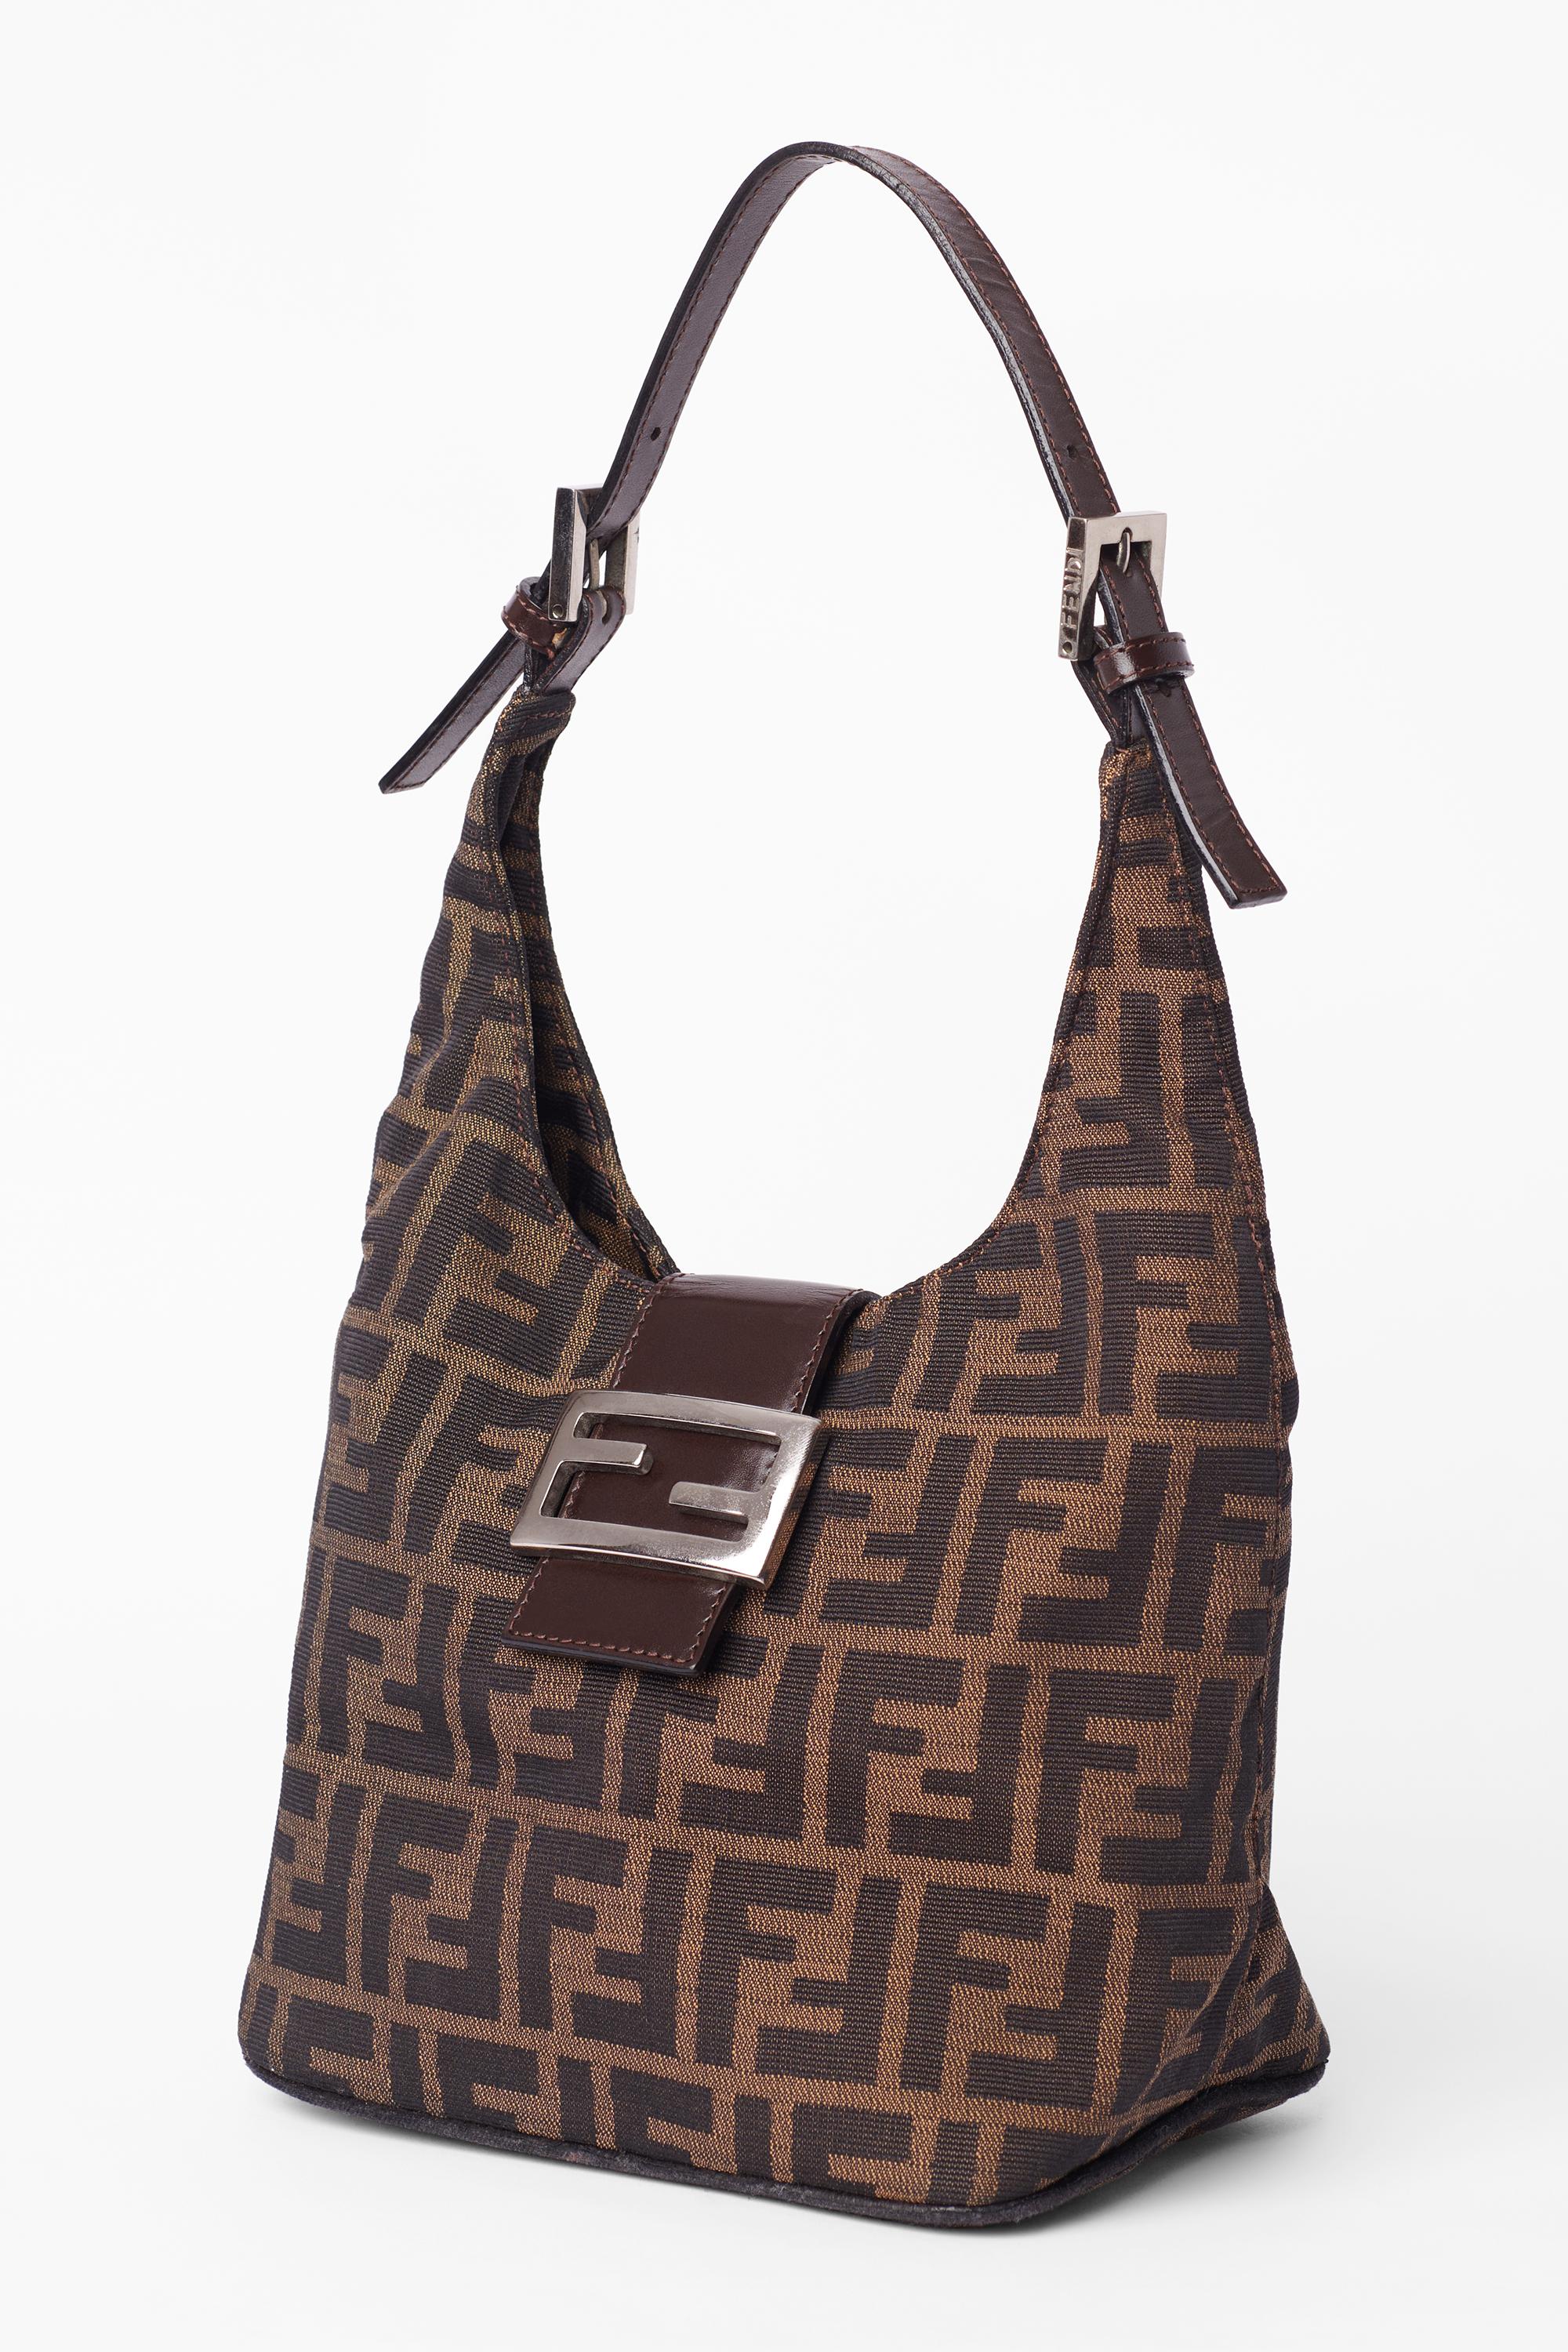 Vintage Fendi 1990’s croissant bag. Features brown zucca monogram print allover, back interior zip pocket, iconic Fend silver hardware, leather strap with adjustable length and Fendi hardware buckles. 

Brand: Fendi
Color: Brown
Year/ Season : Circa